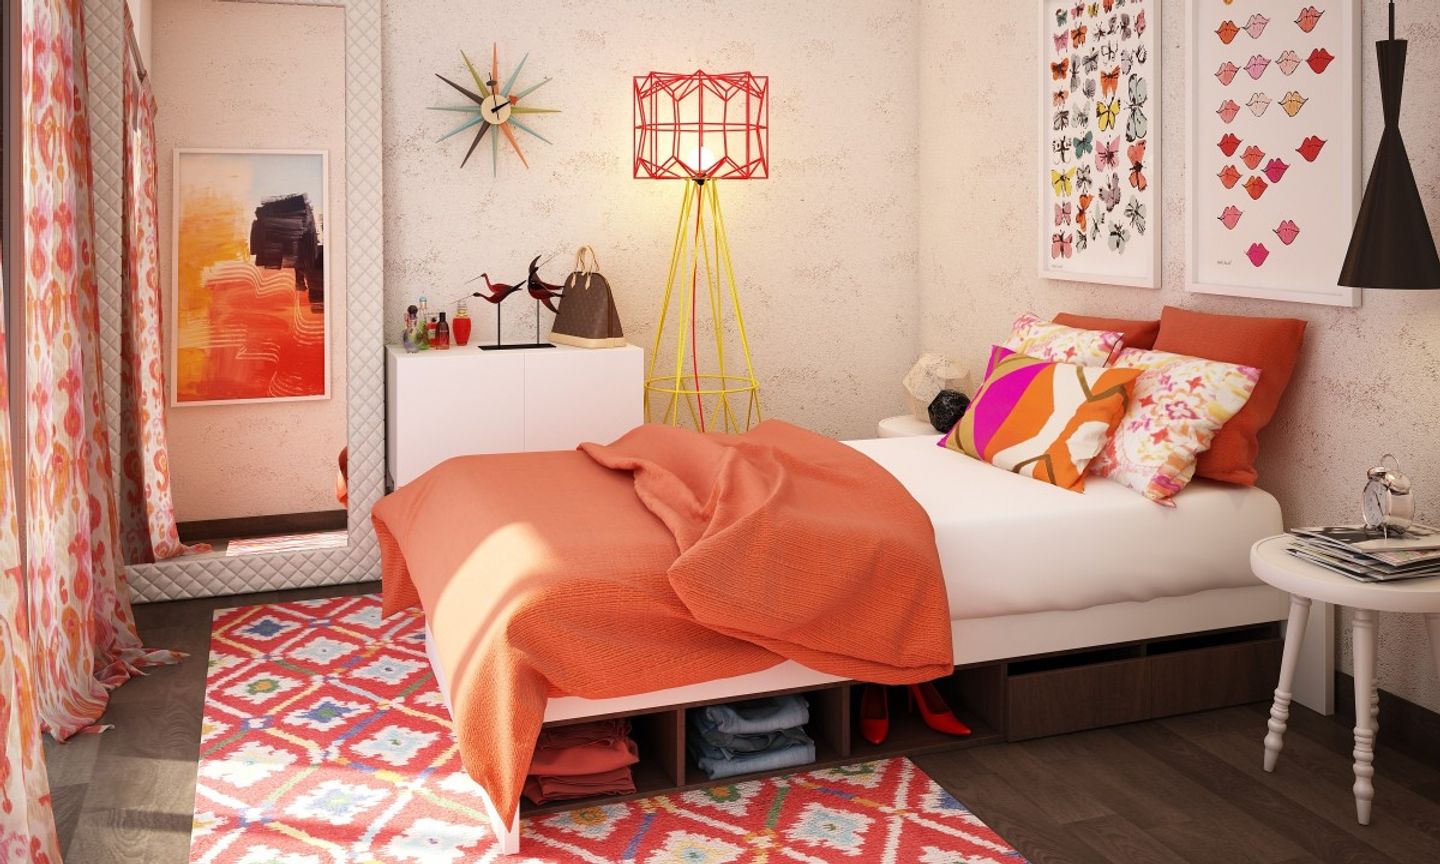 Bohemian Orange And White Bedroom Design With Wallpaint